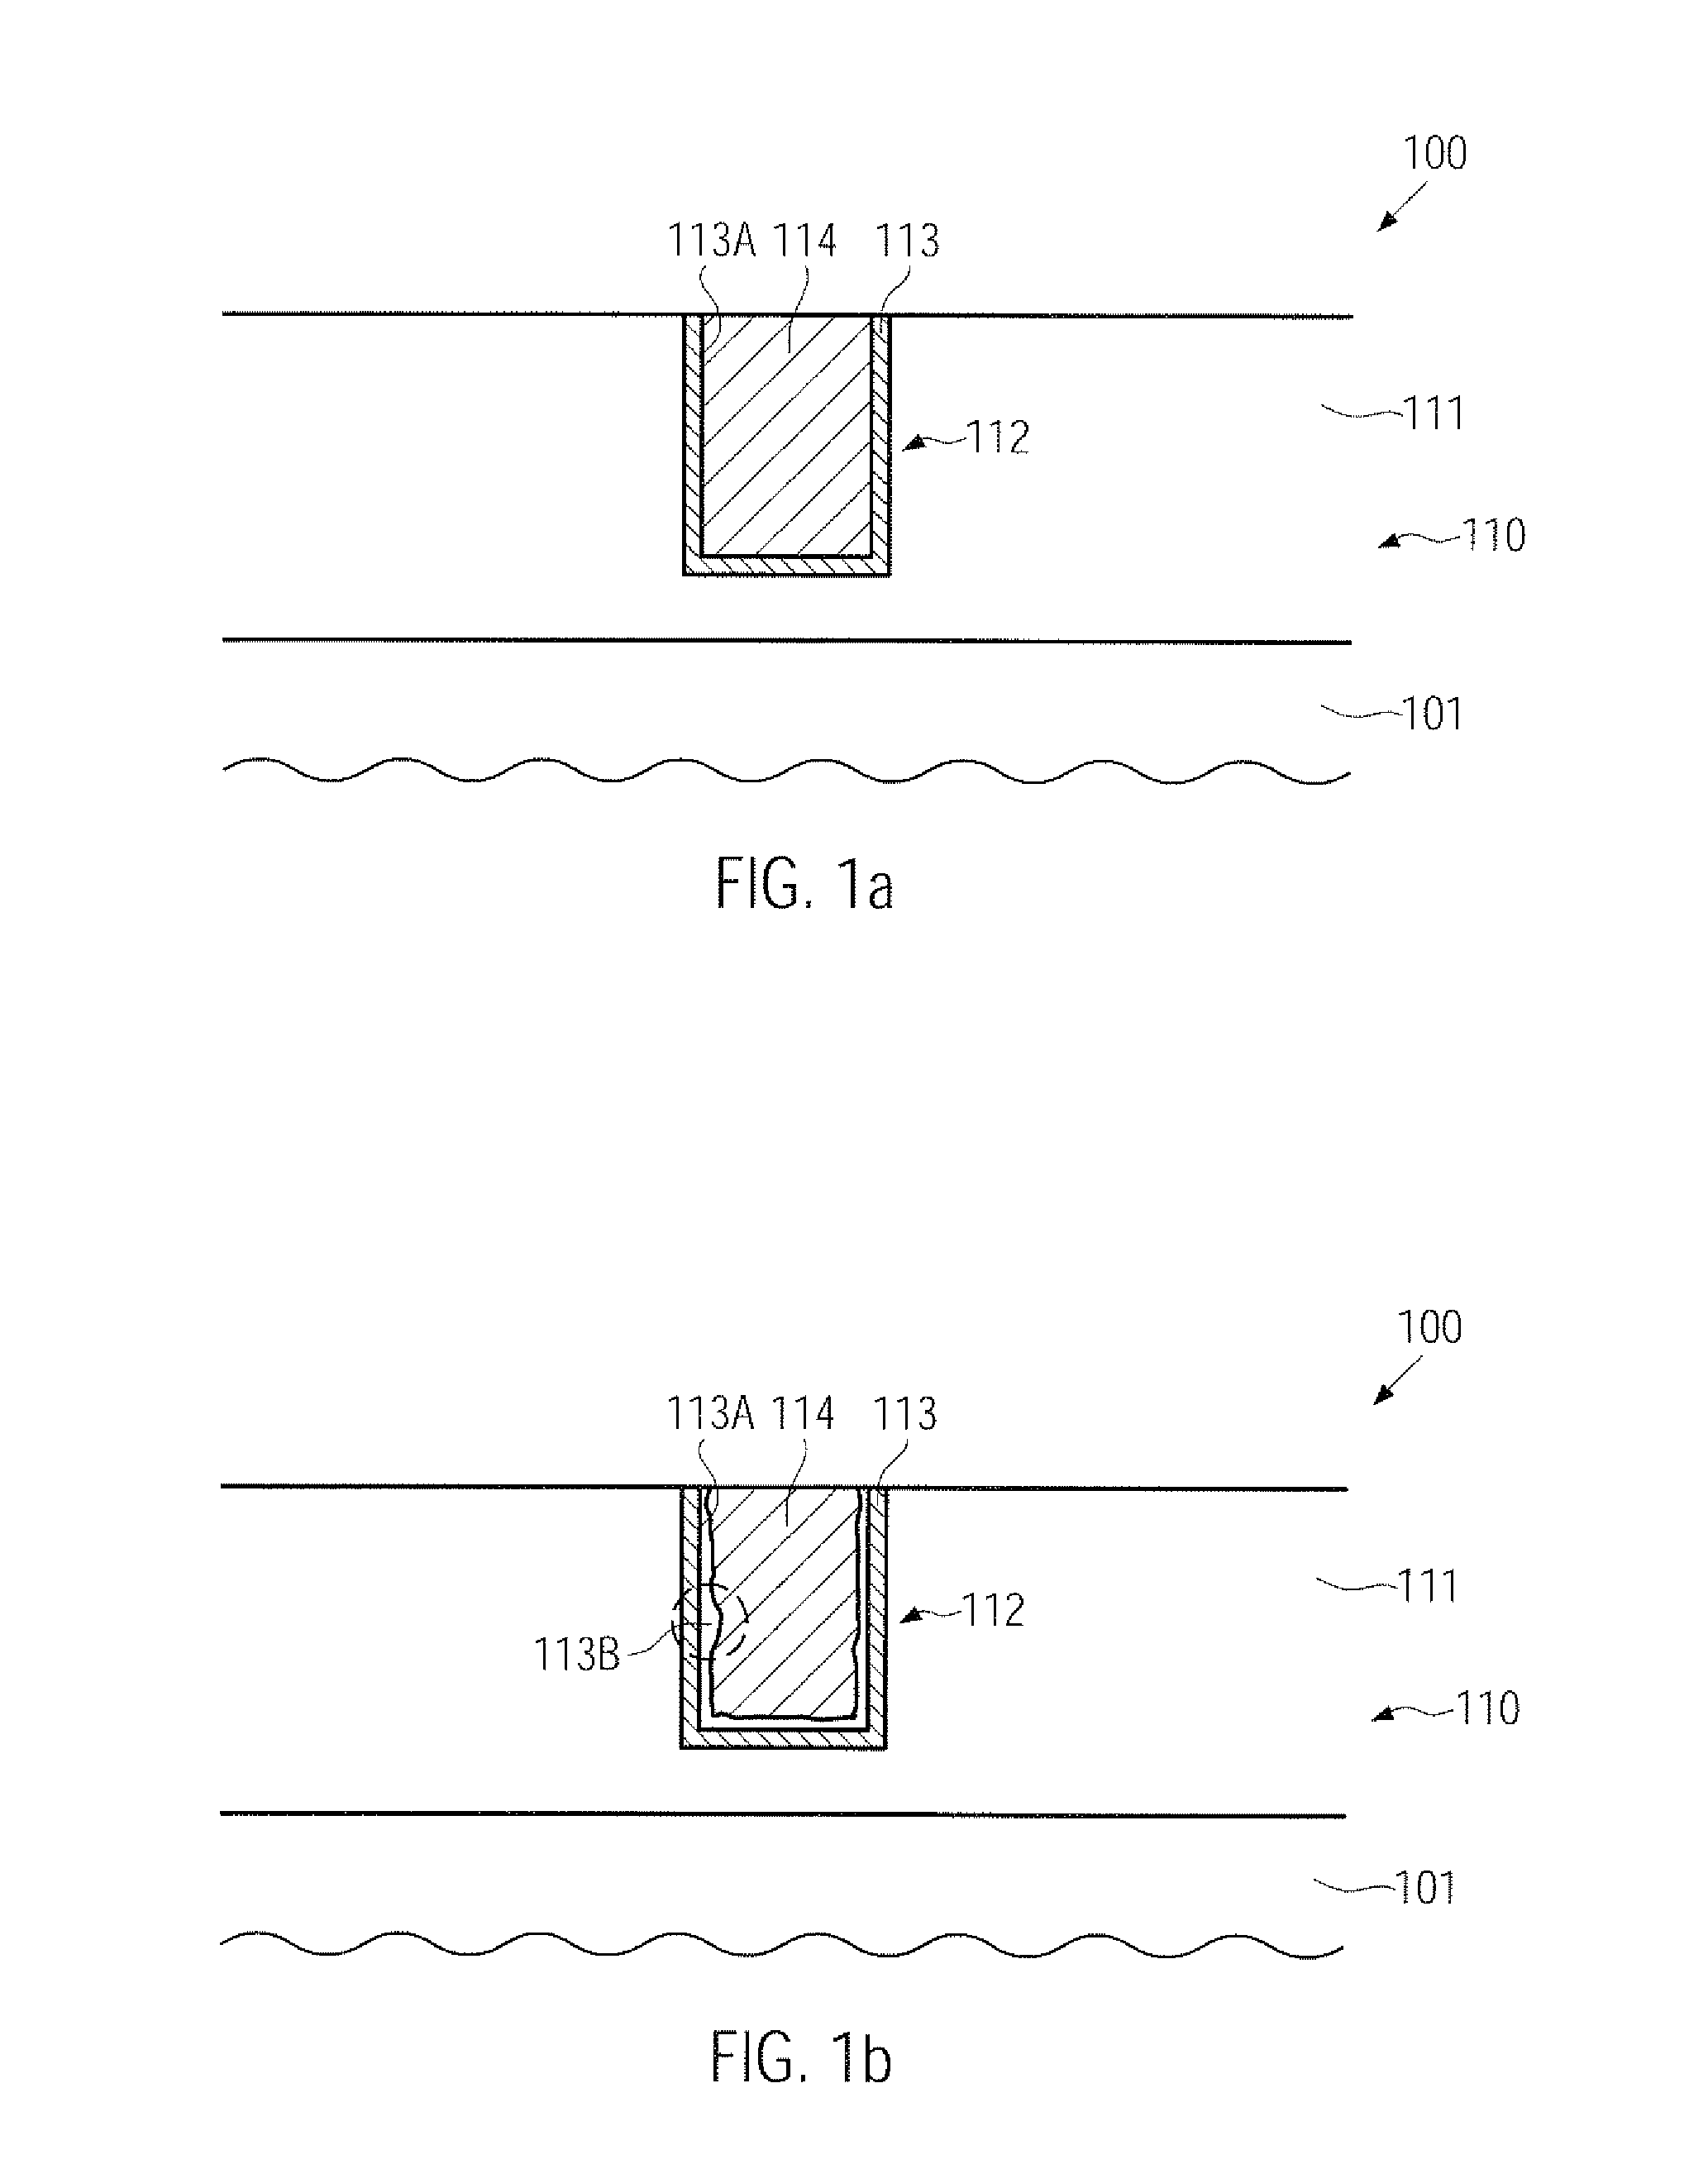 Method of forming a metal directly on a conductive barrier layer by electrochemical deposition using an oxygen-depleted ambient